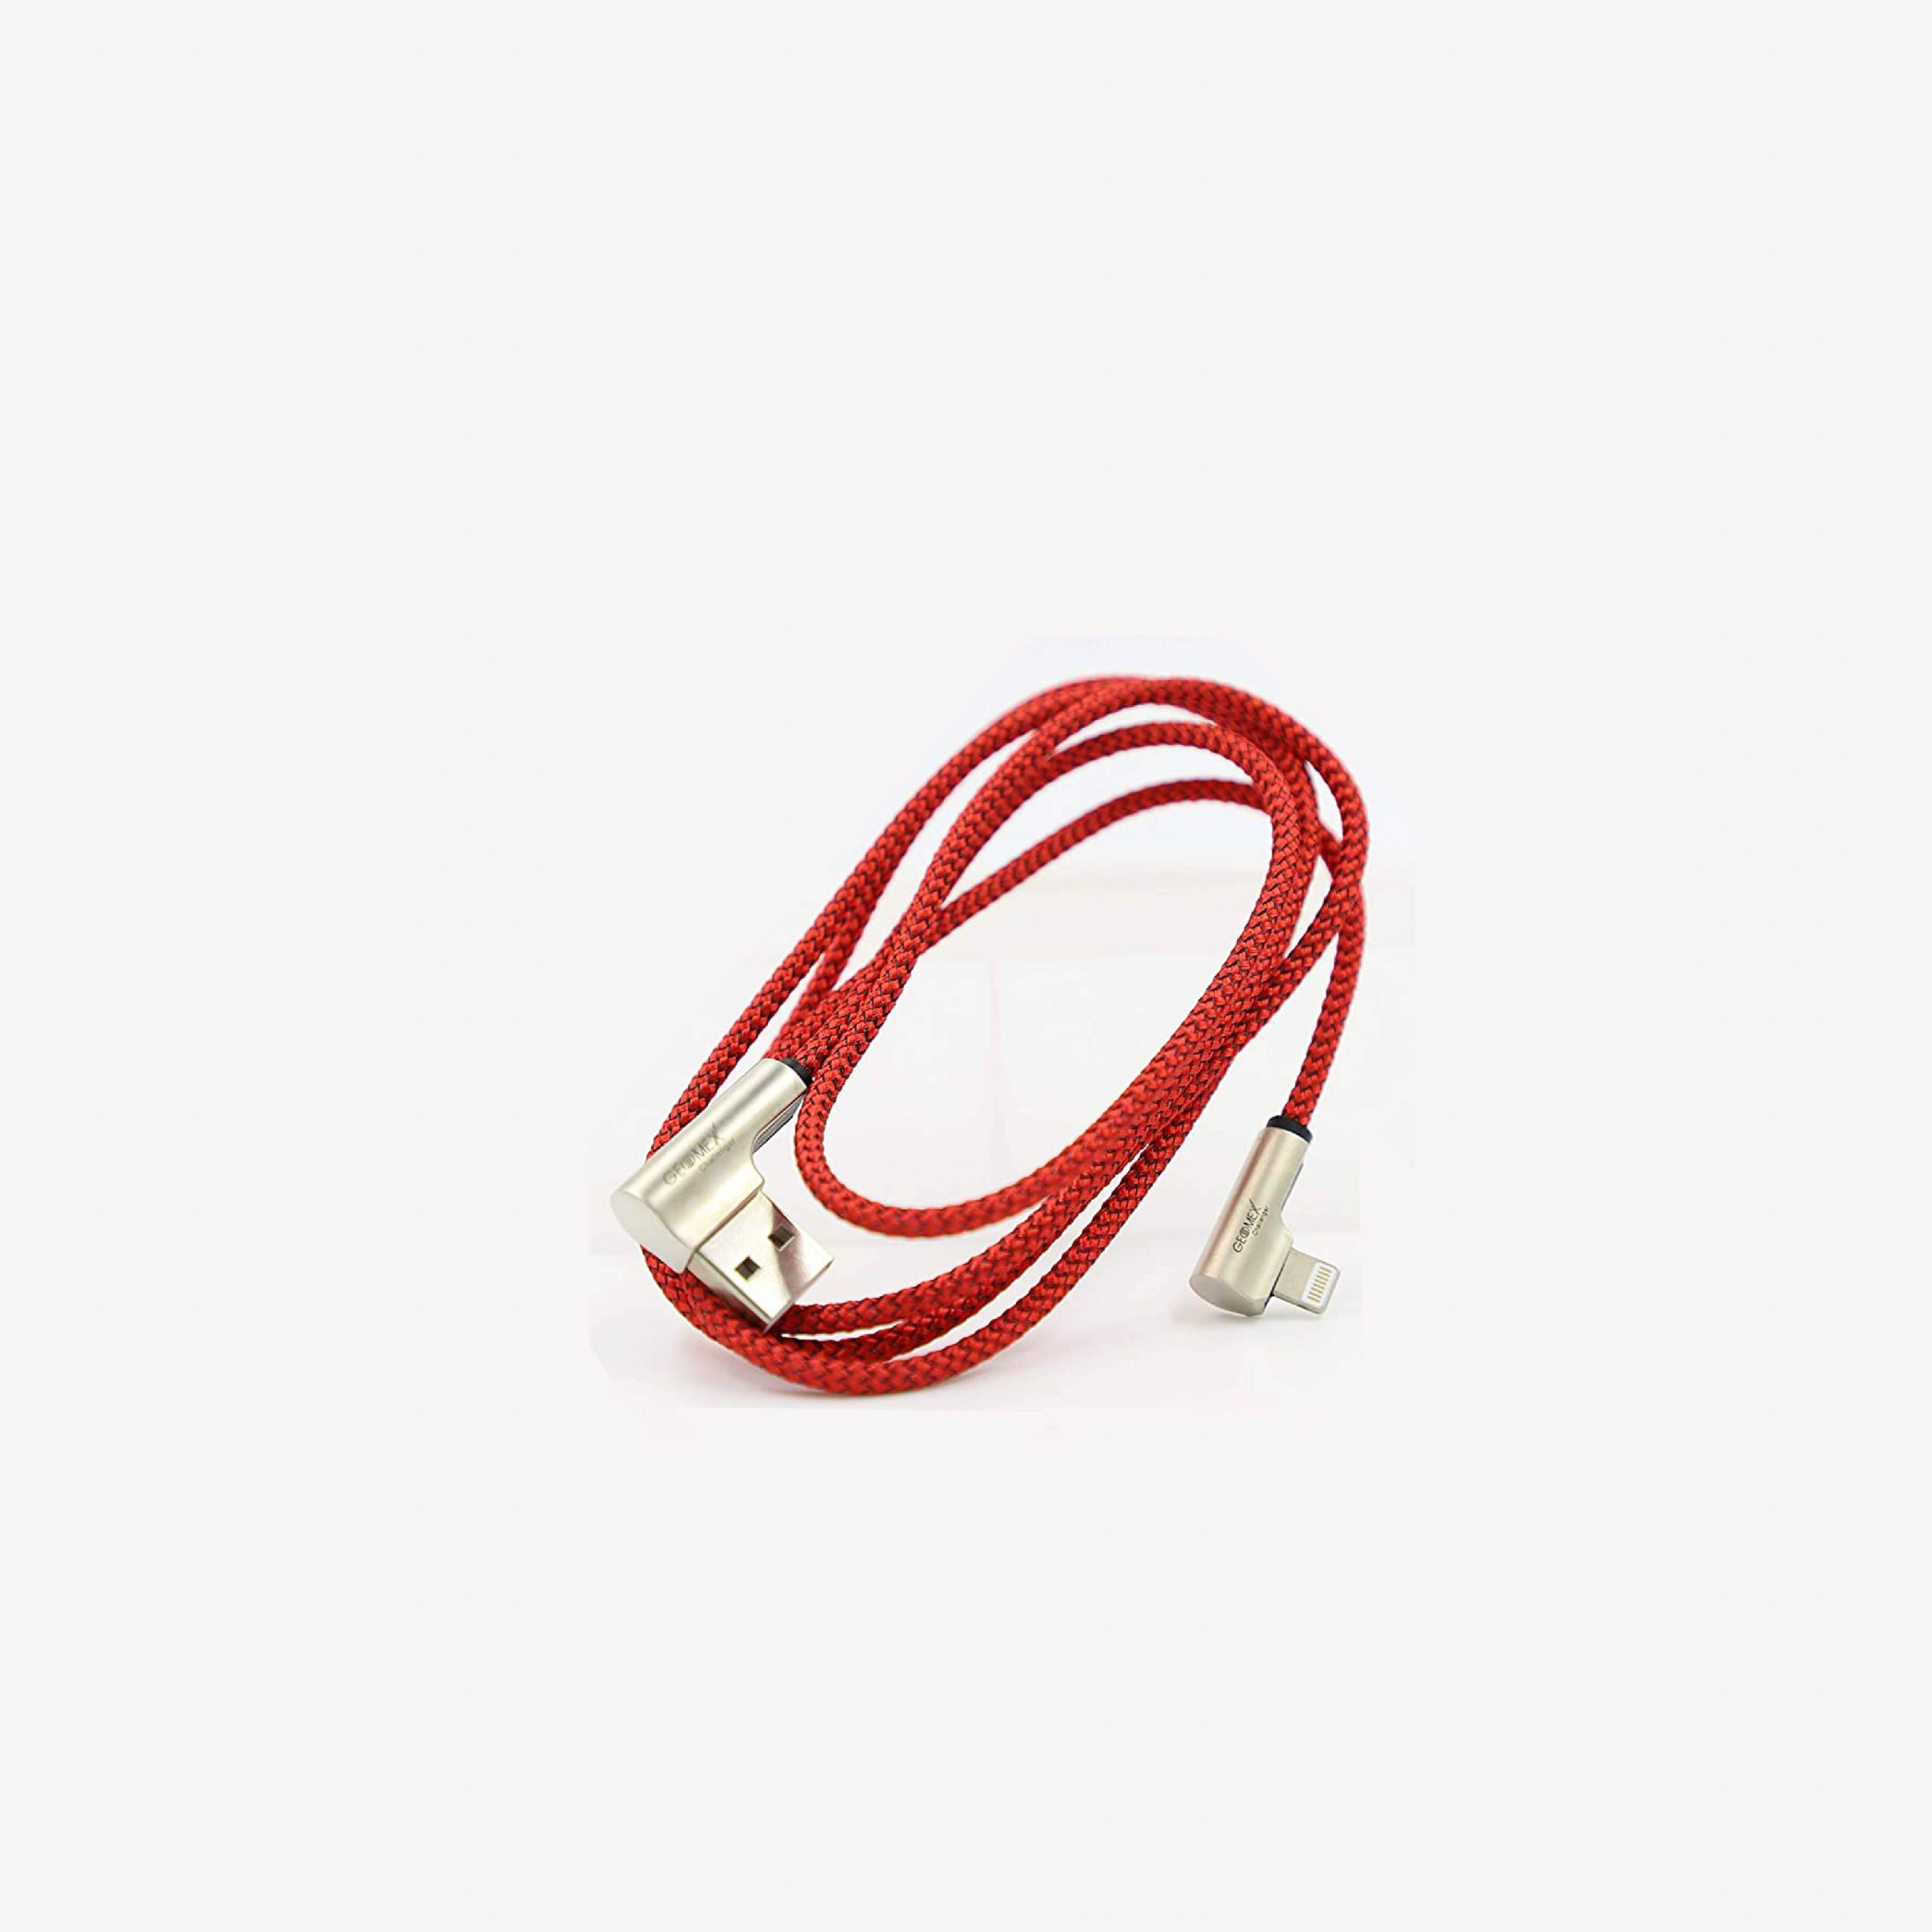 Geomex iPhone Charger Cable 1.2m Long